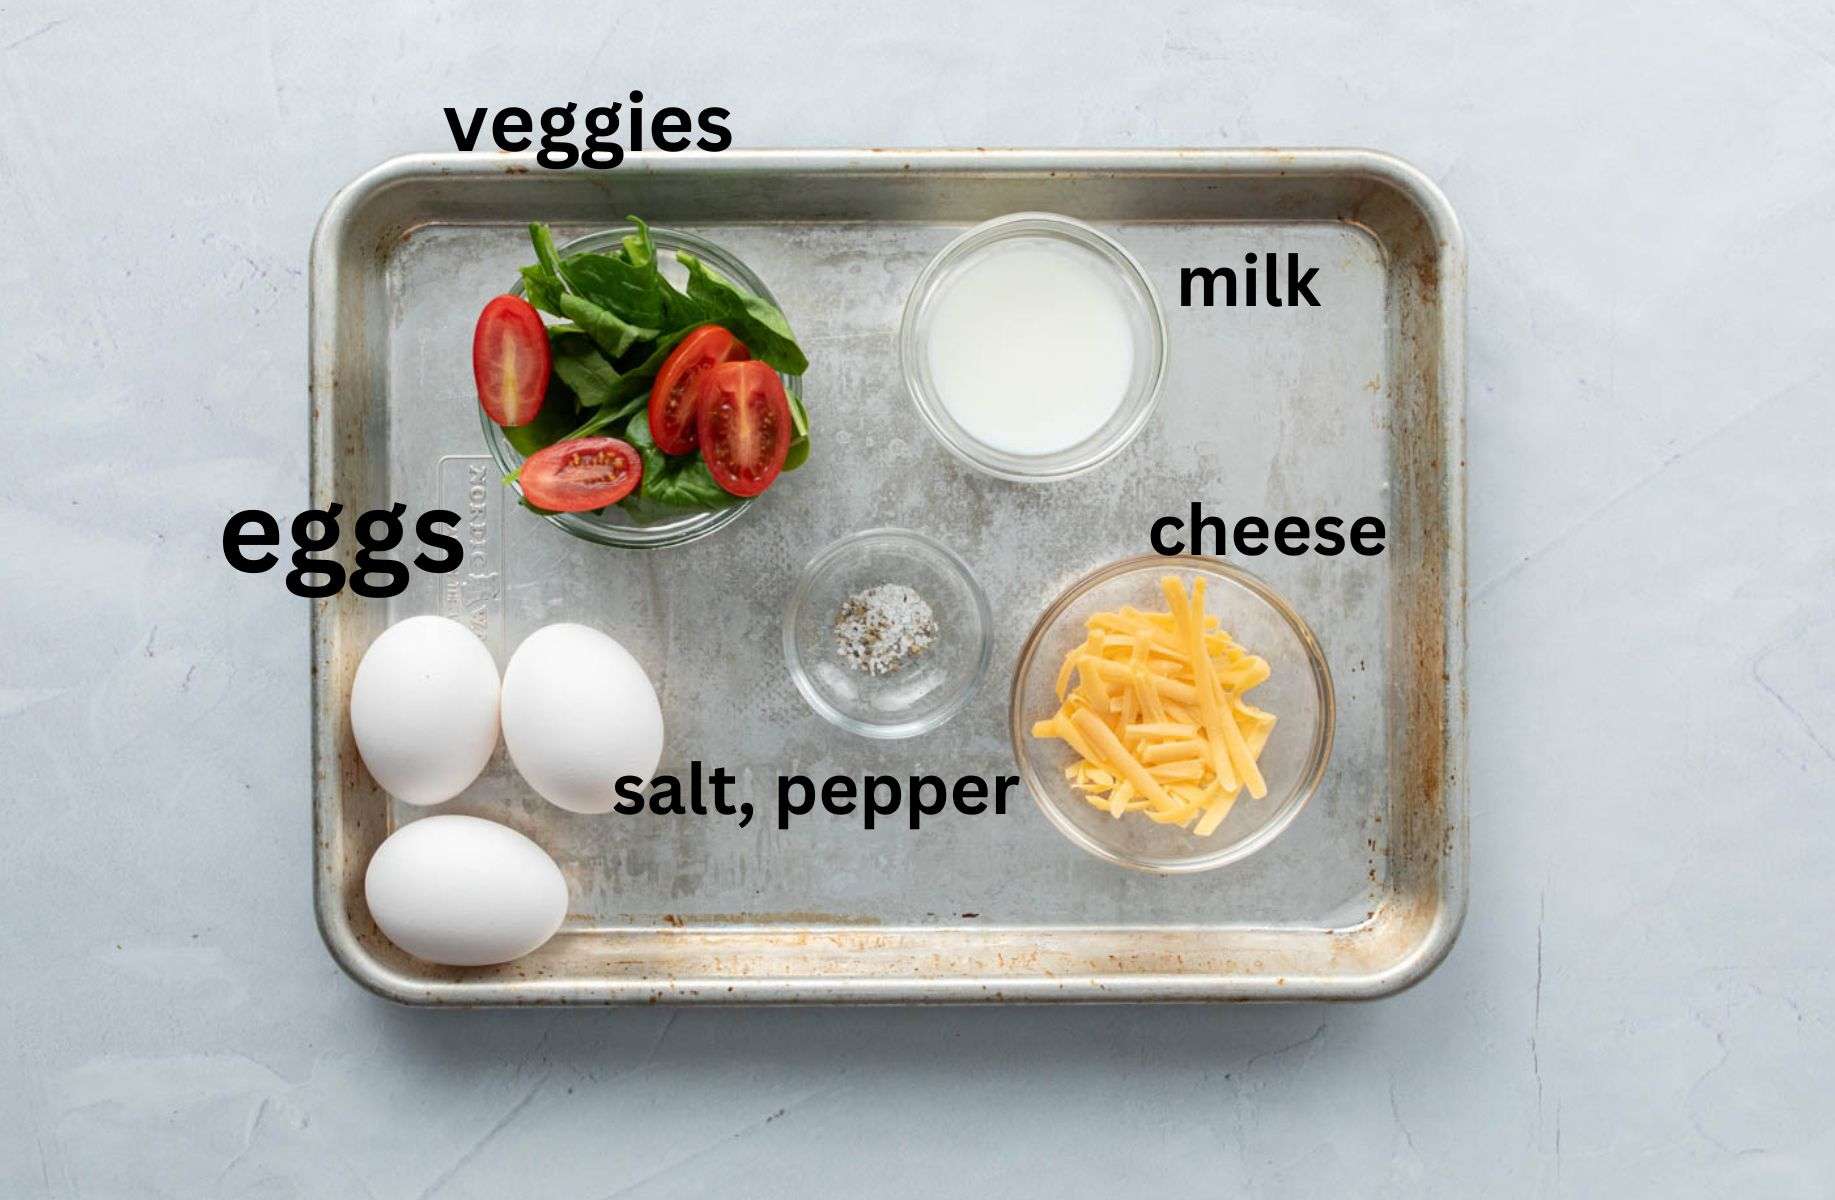 eggs, cheese, vegetables on baking sheet with labels